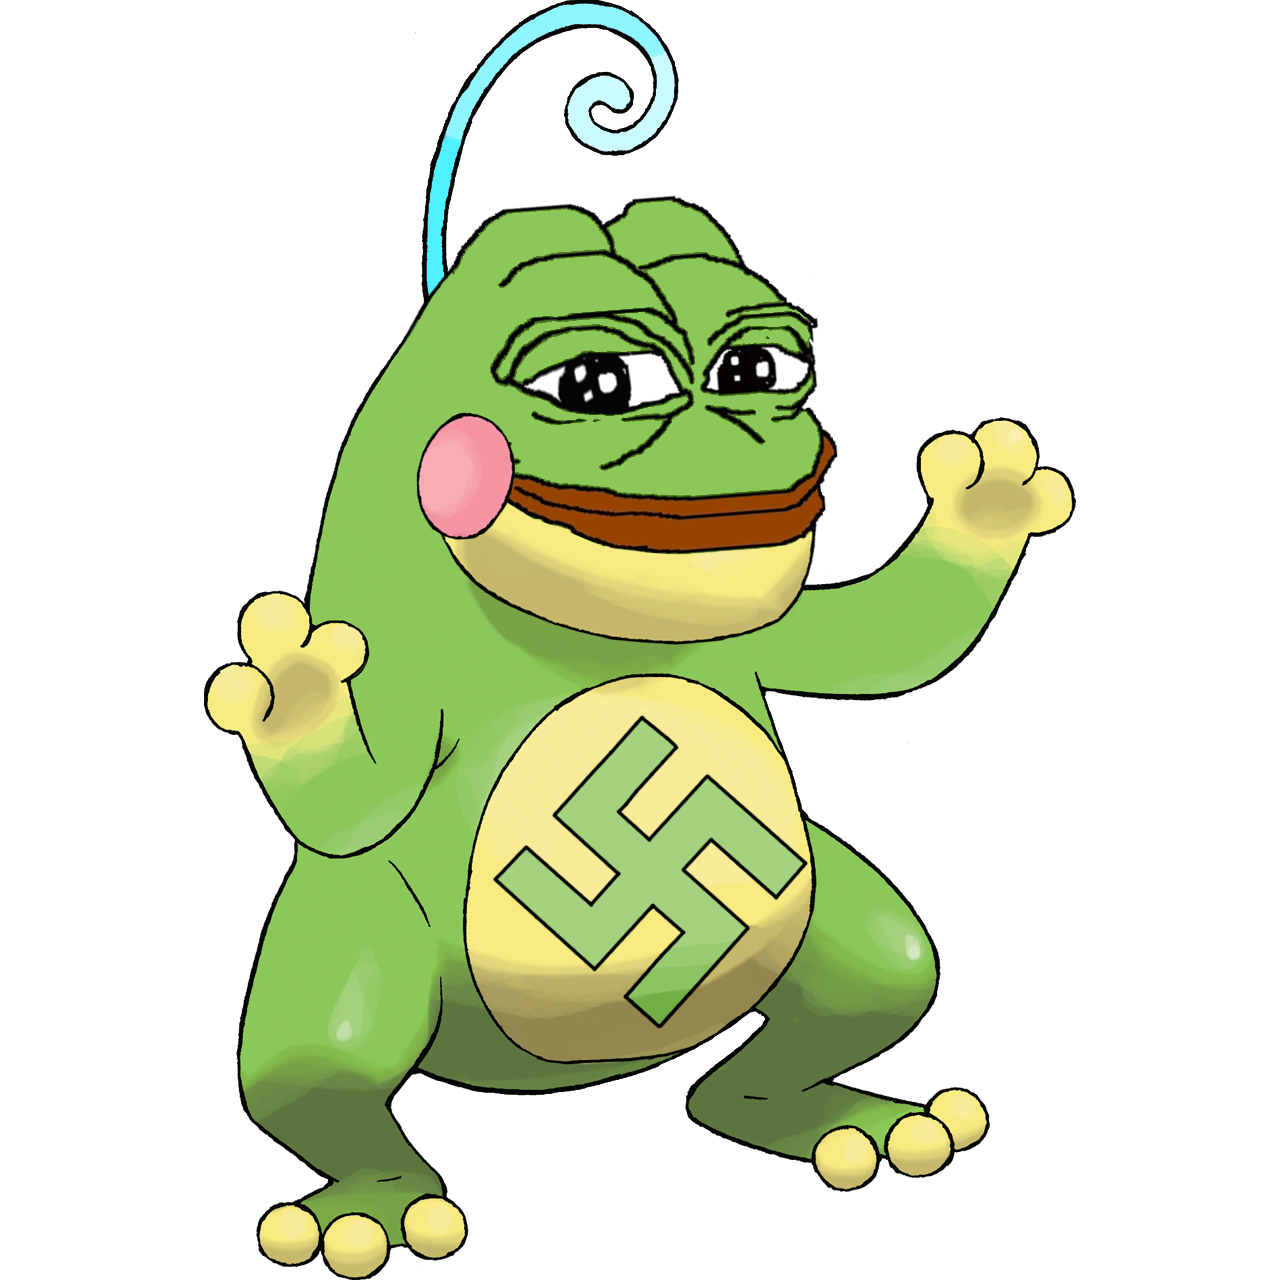 Pepe-the-Frog-in-versione-nazi.png